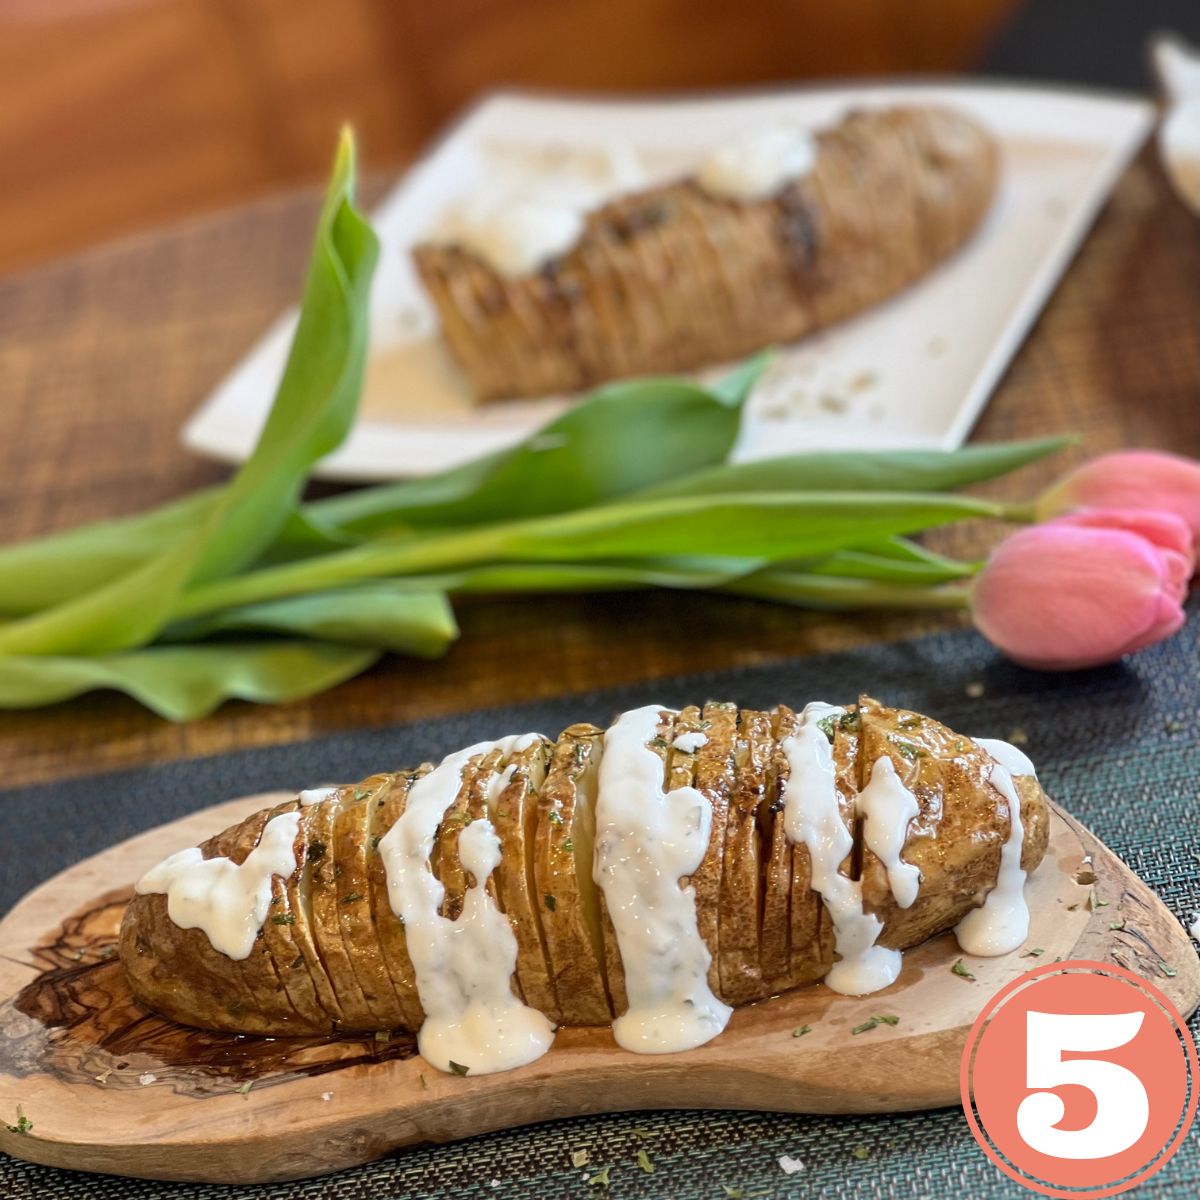 Ranch dressing drizzled over a WW russet hasselback potato on a table with a pink tulip